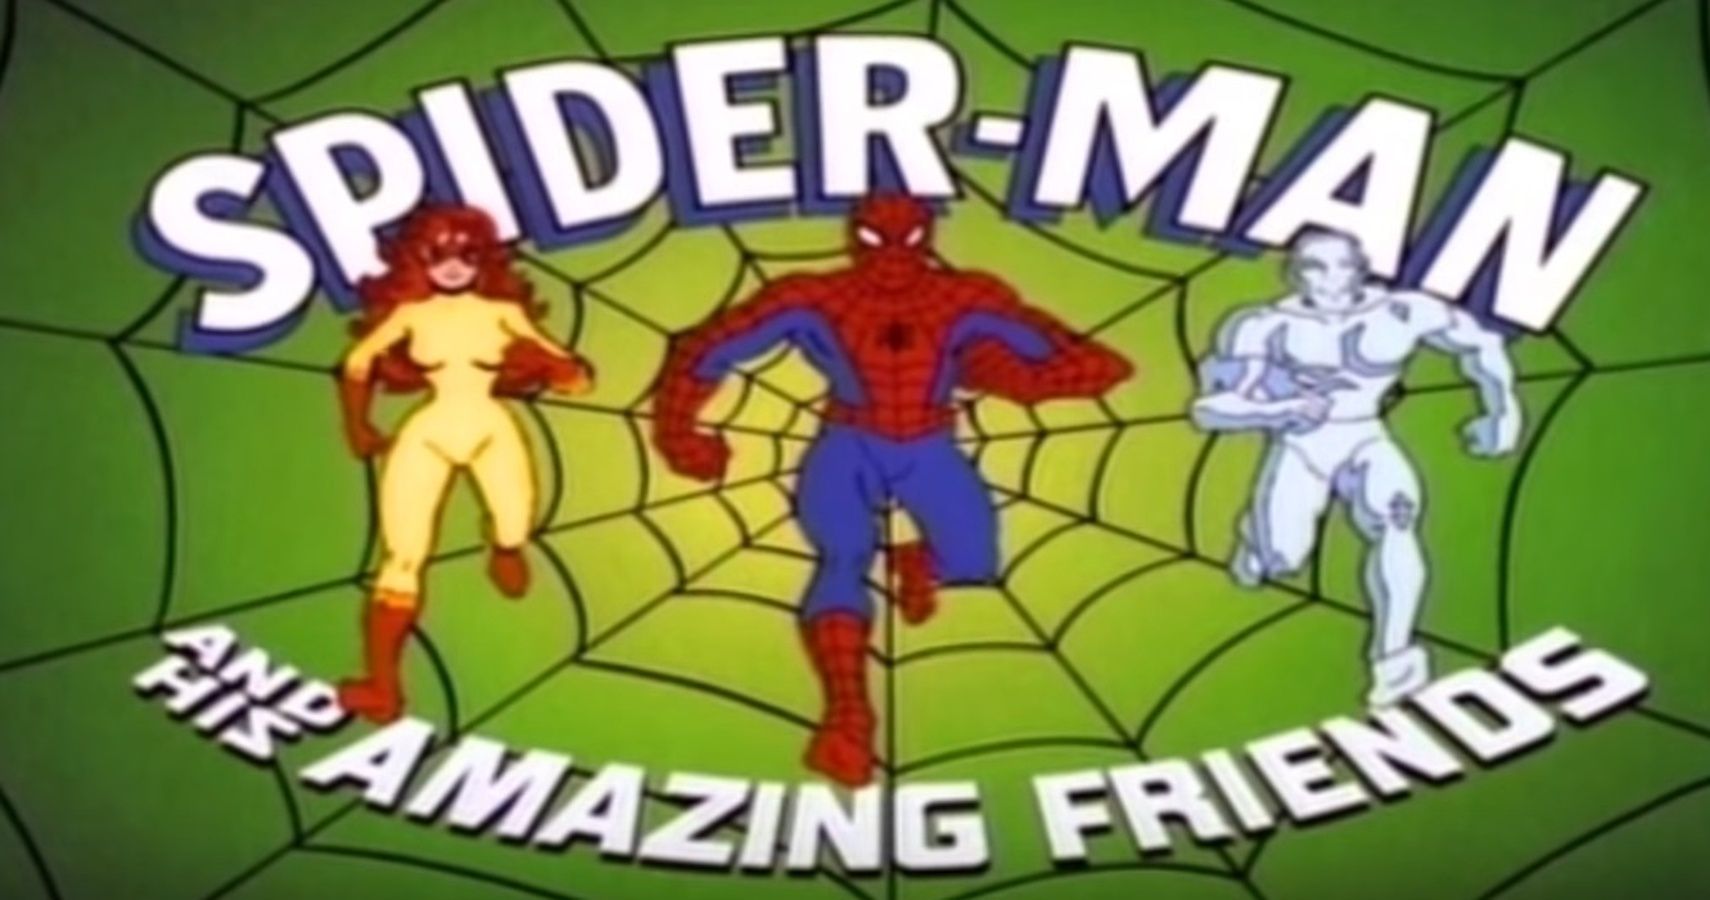 download spider and his amazing friends